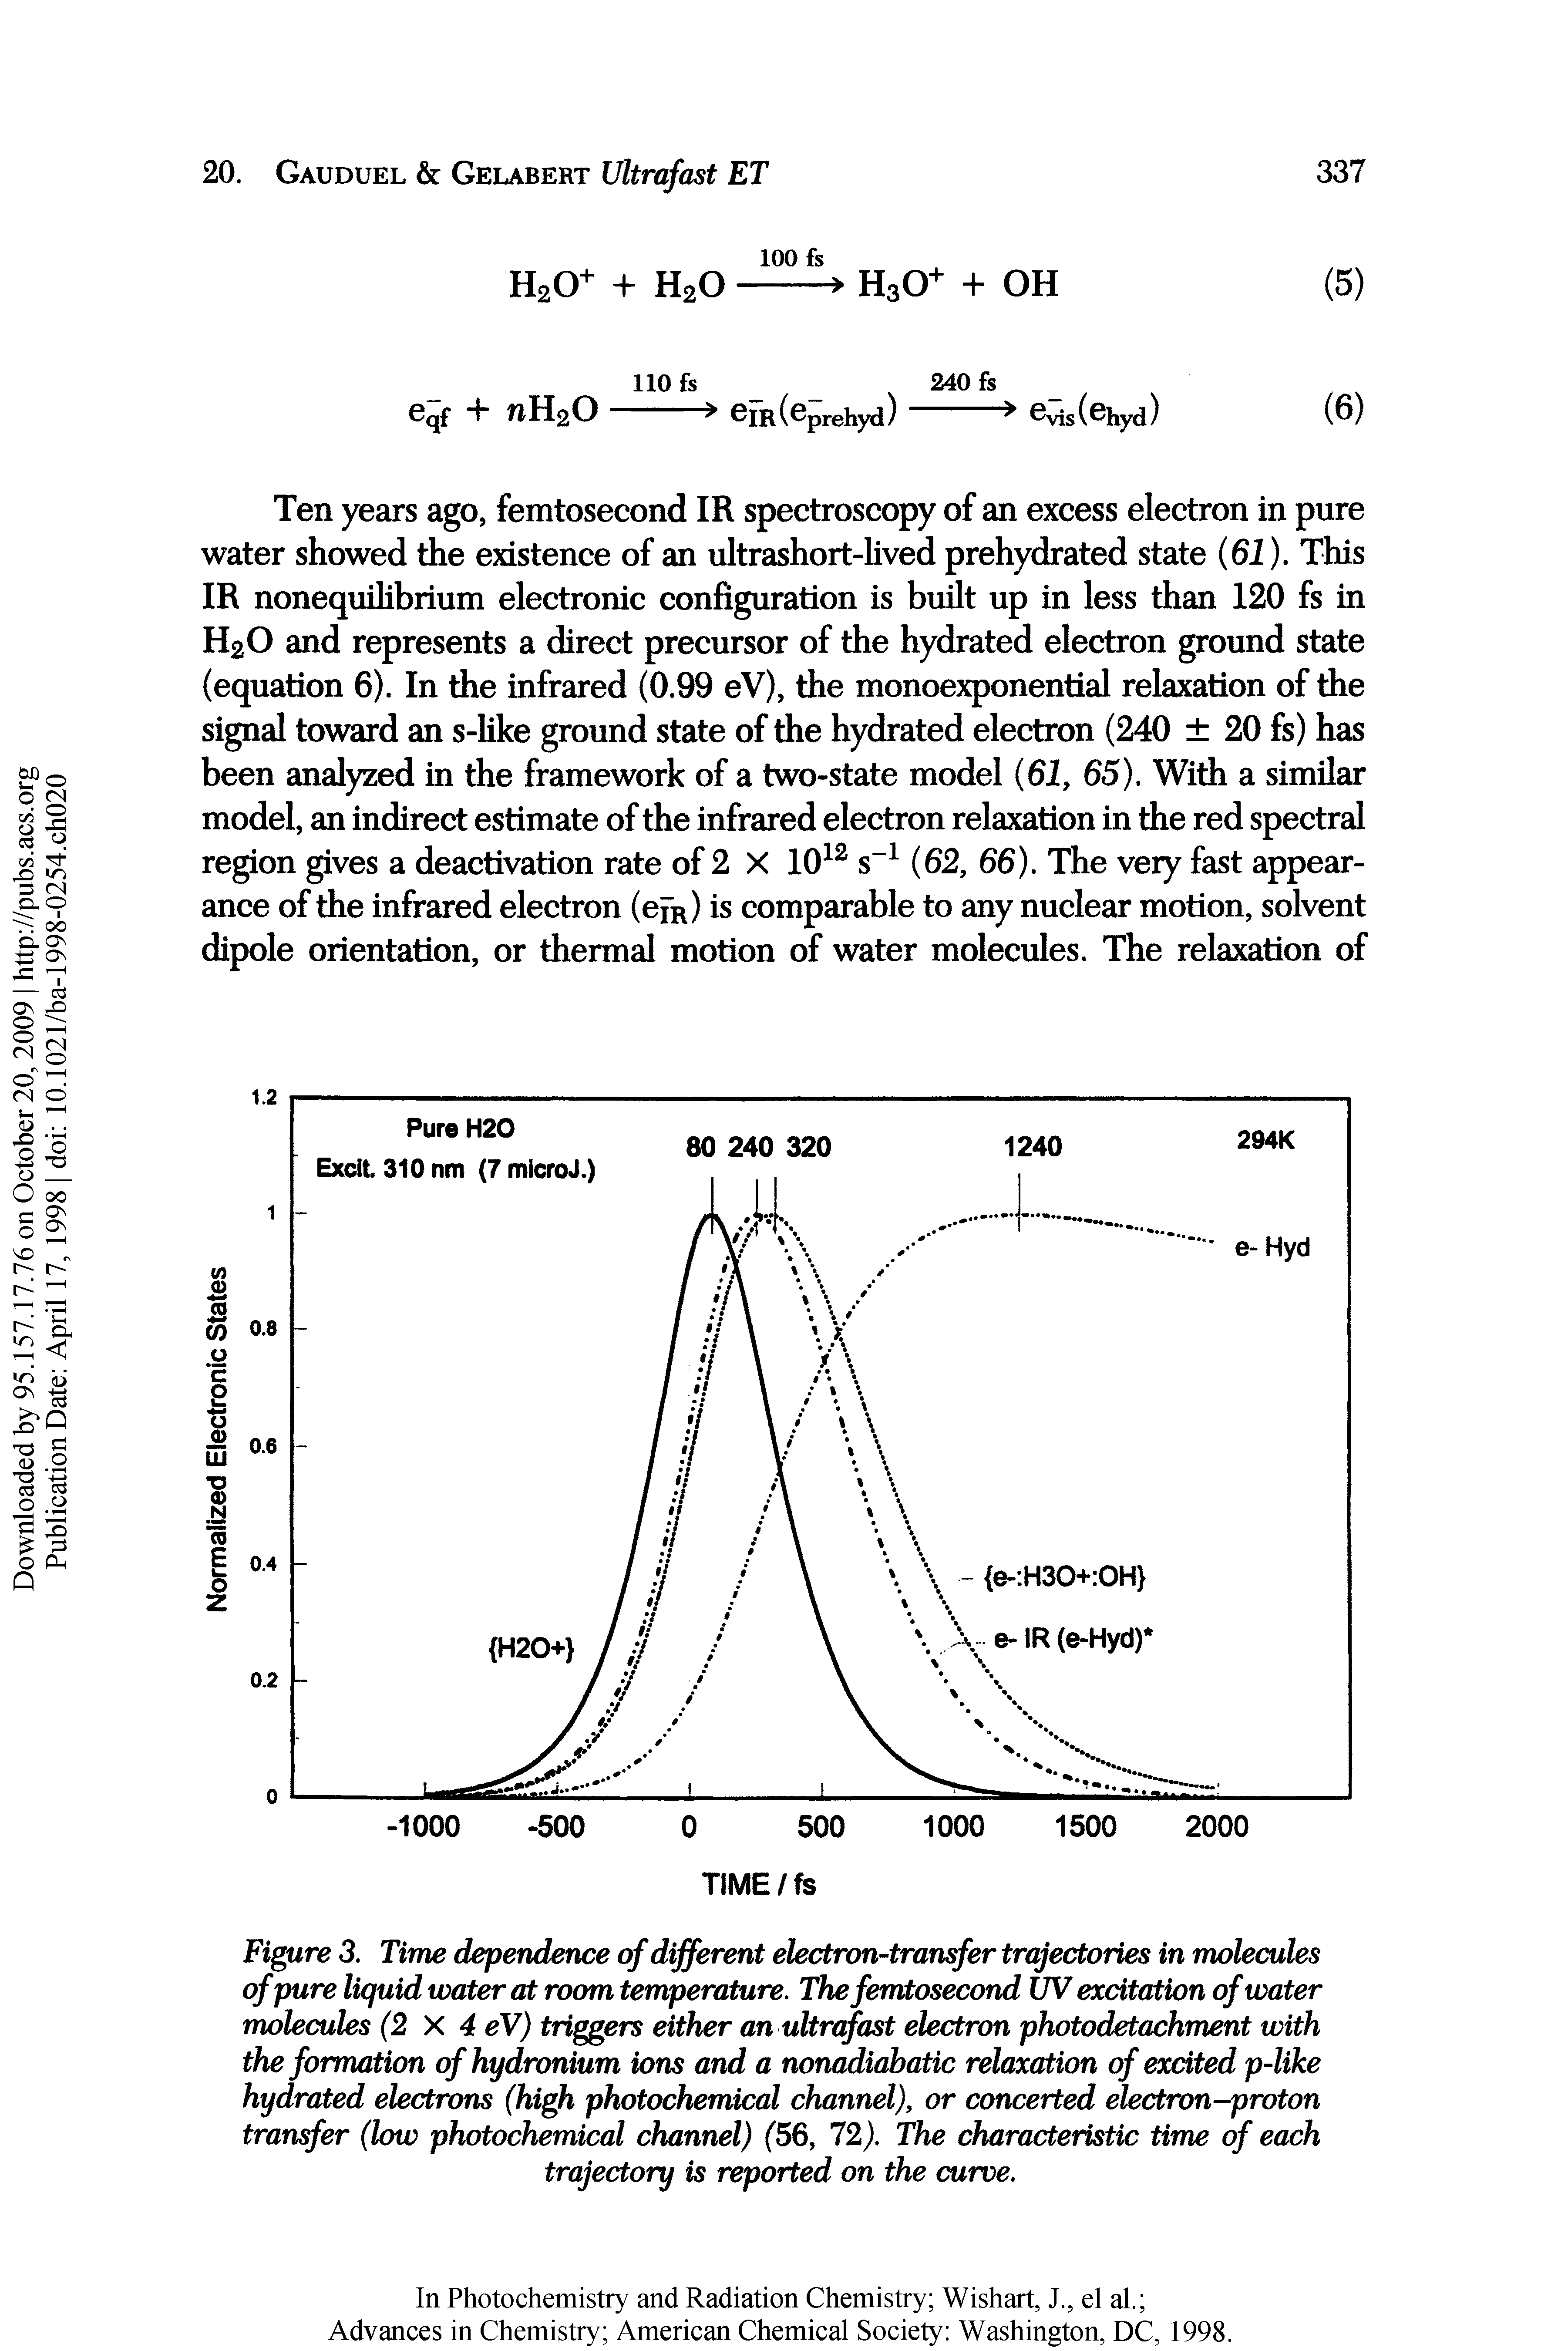 Figure 3. Time dependence of different electron-transfer trajectories in molecules of pure liquid water at room temperature. The femtosecond UV excitation of water molecules (2X4 eV) triggers either an ultrafast electron photodetachment with the formation of hydronium ions and a nonadiabatic relaxation of excited p-like hydrated electrons (high photochemical channel), or concerted electron-proton transfer (low photochemical channel) (56, 72). The characteristic time of each trajectory is reported on the curve.